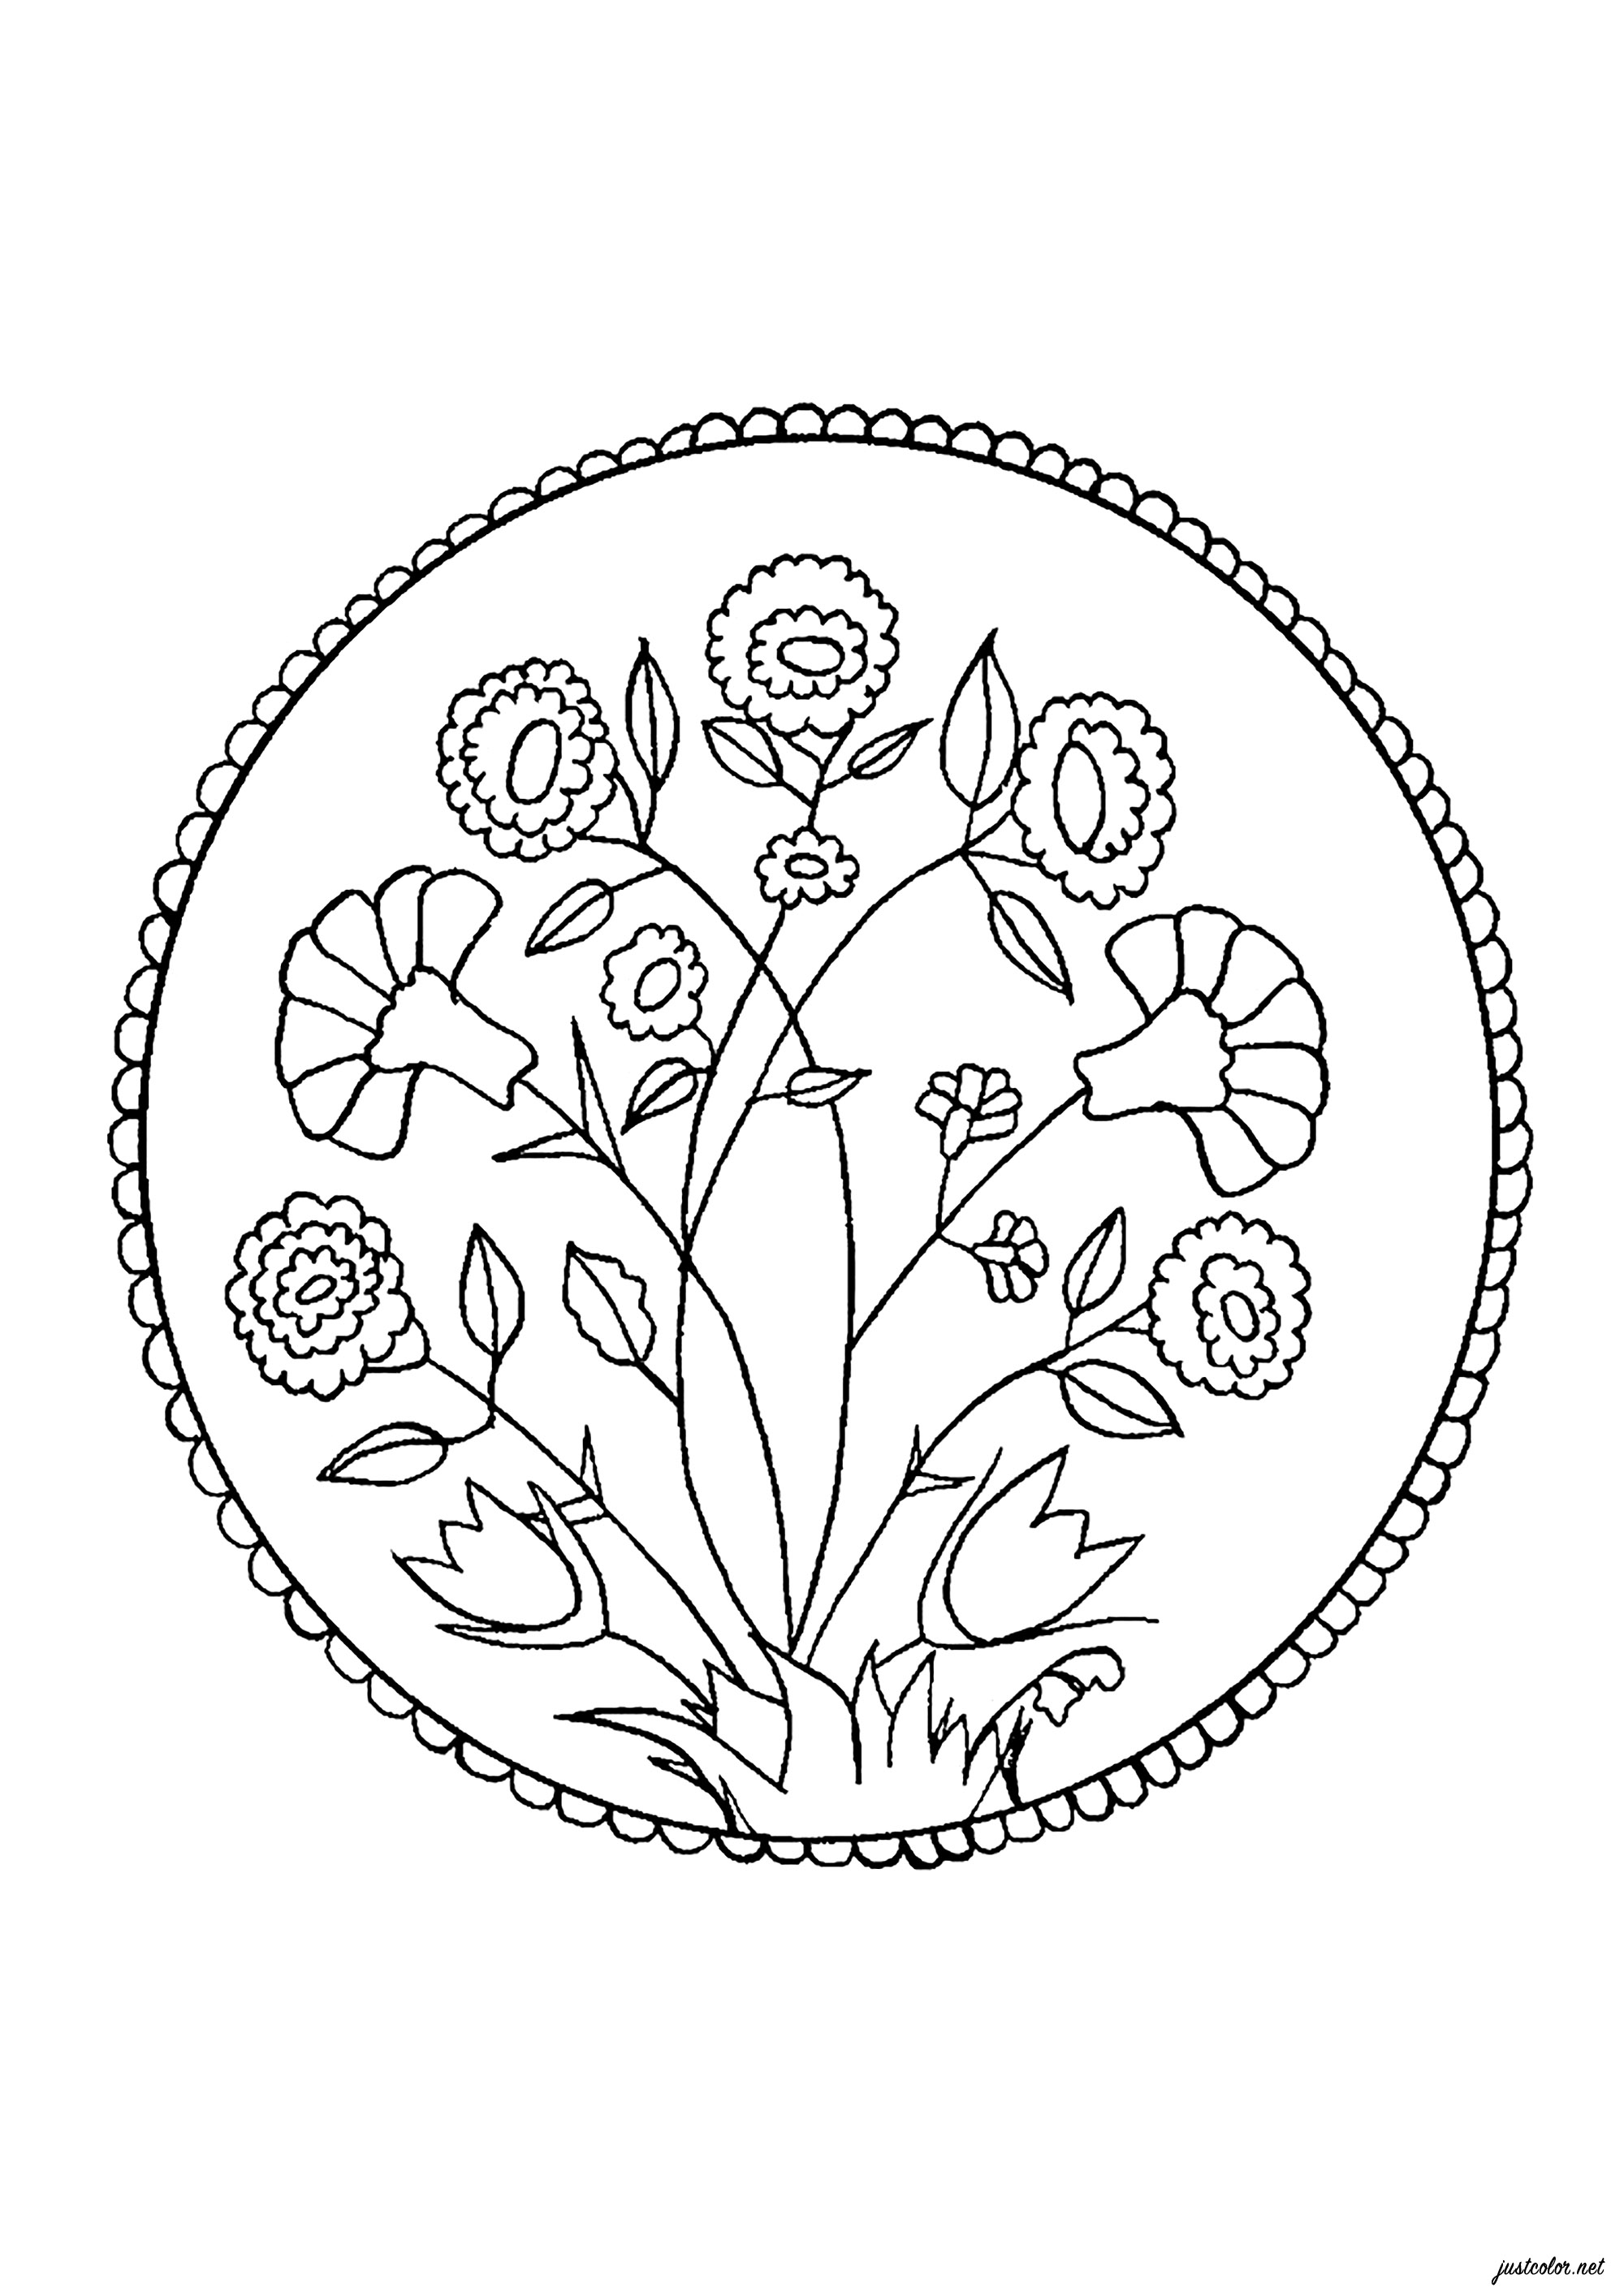 Coloring inspired by a 16th century dish representing various plants and flowers